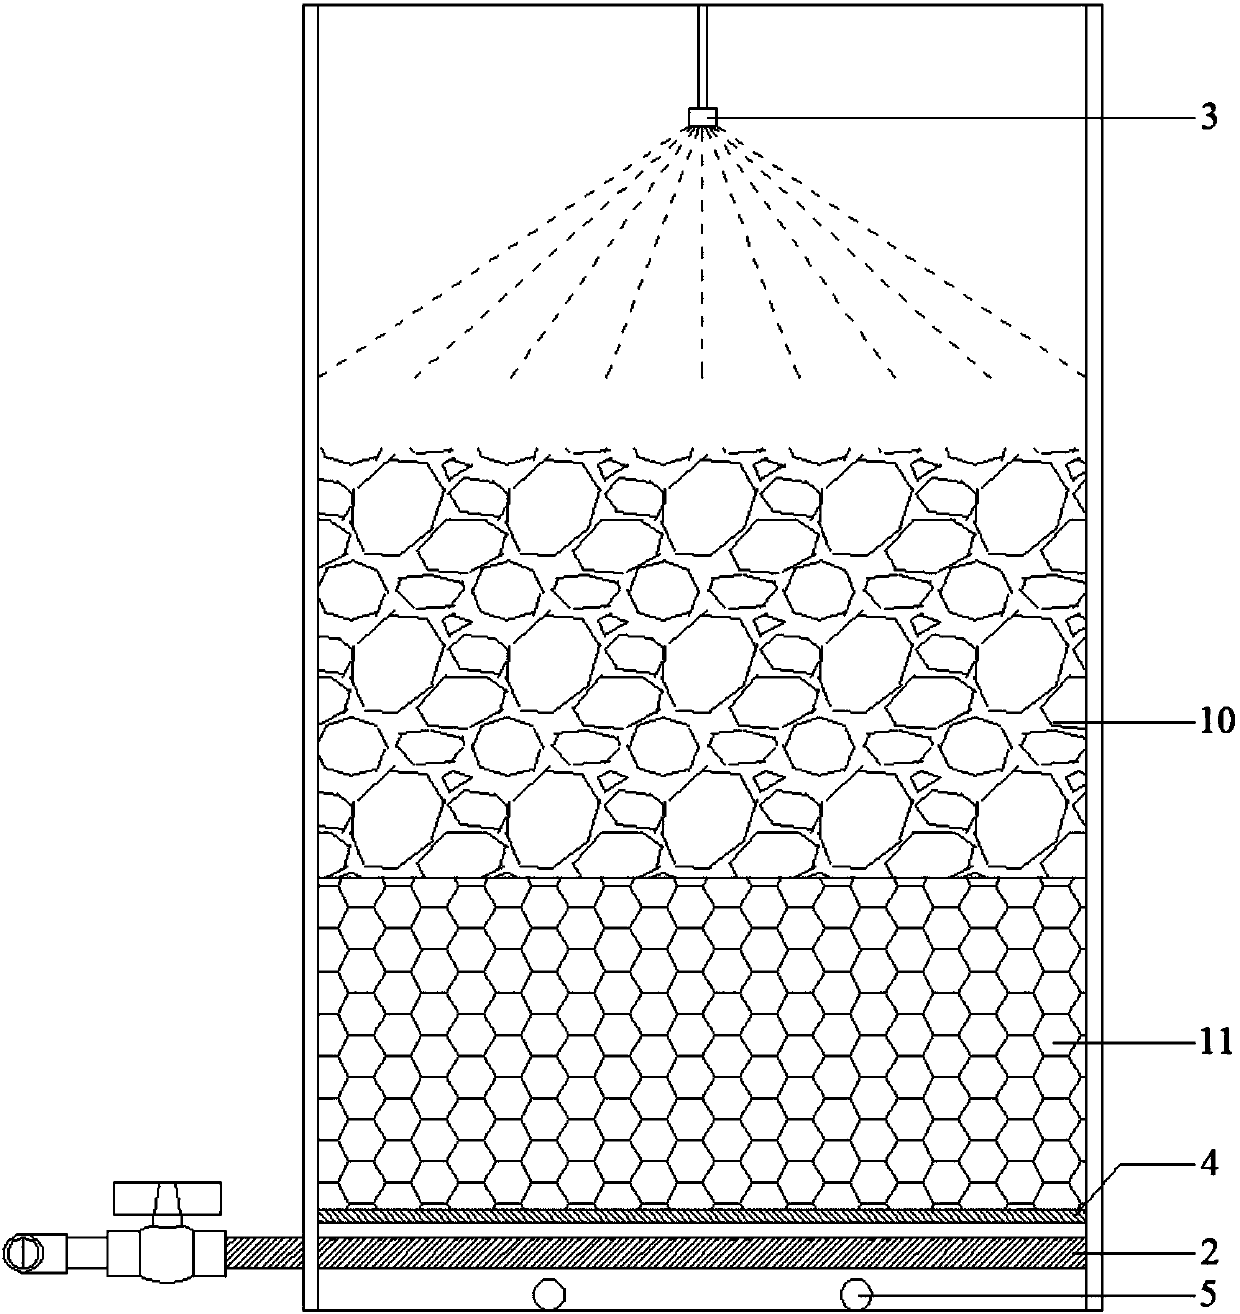 A wastewater percolation tank and a wastewater percolation system